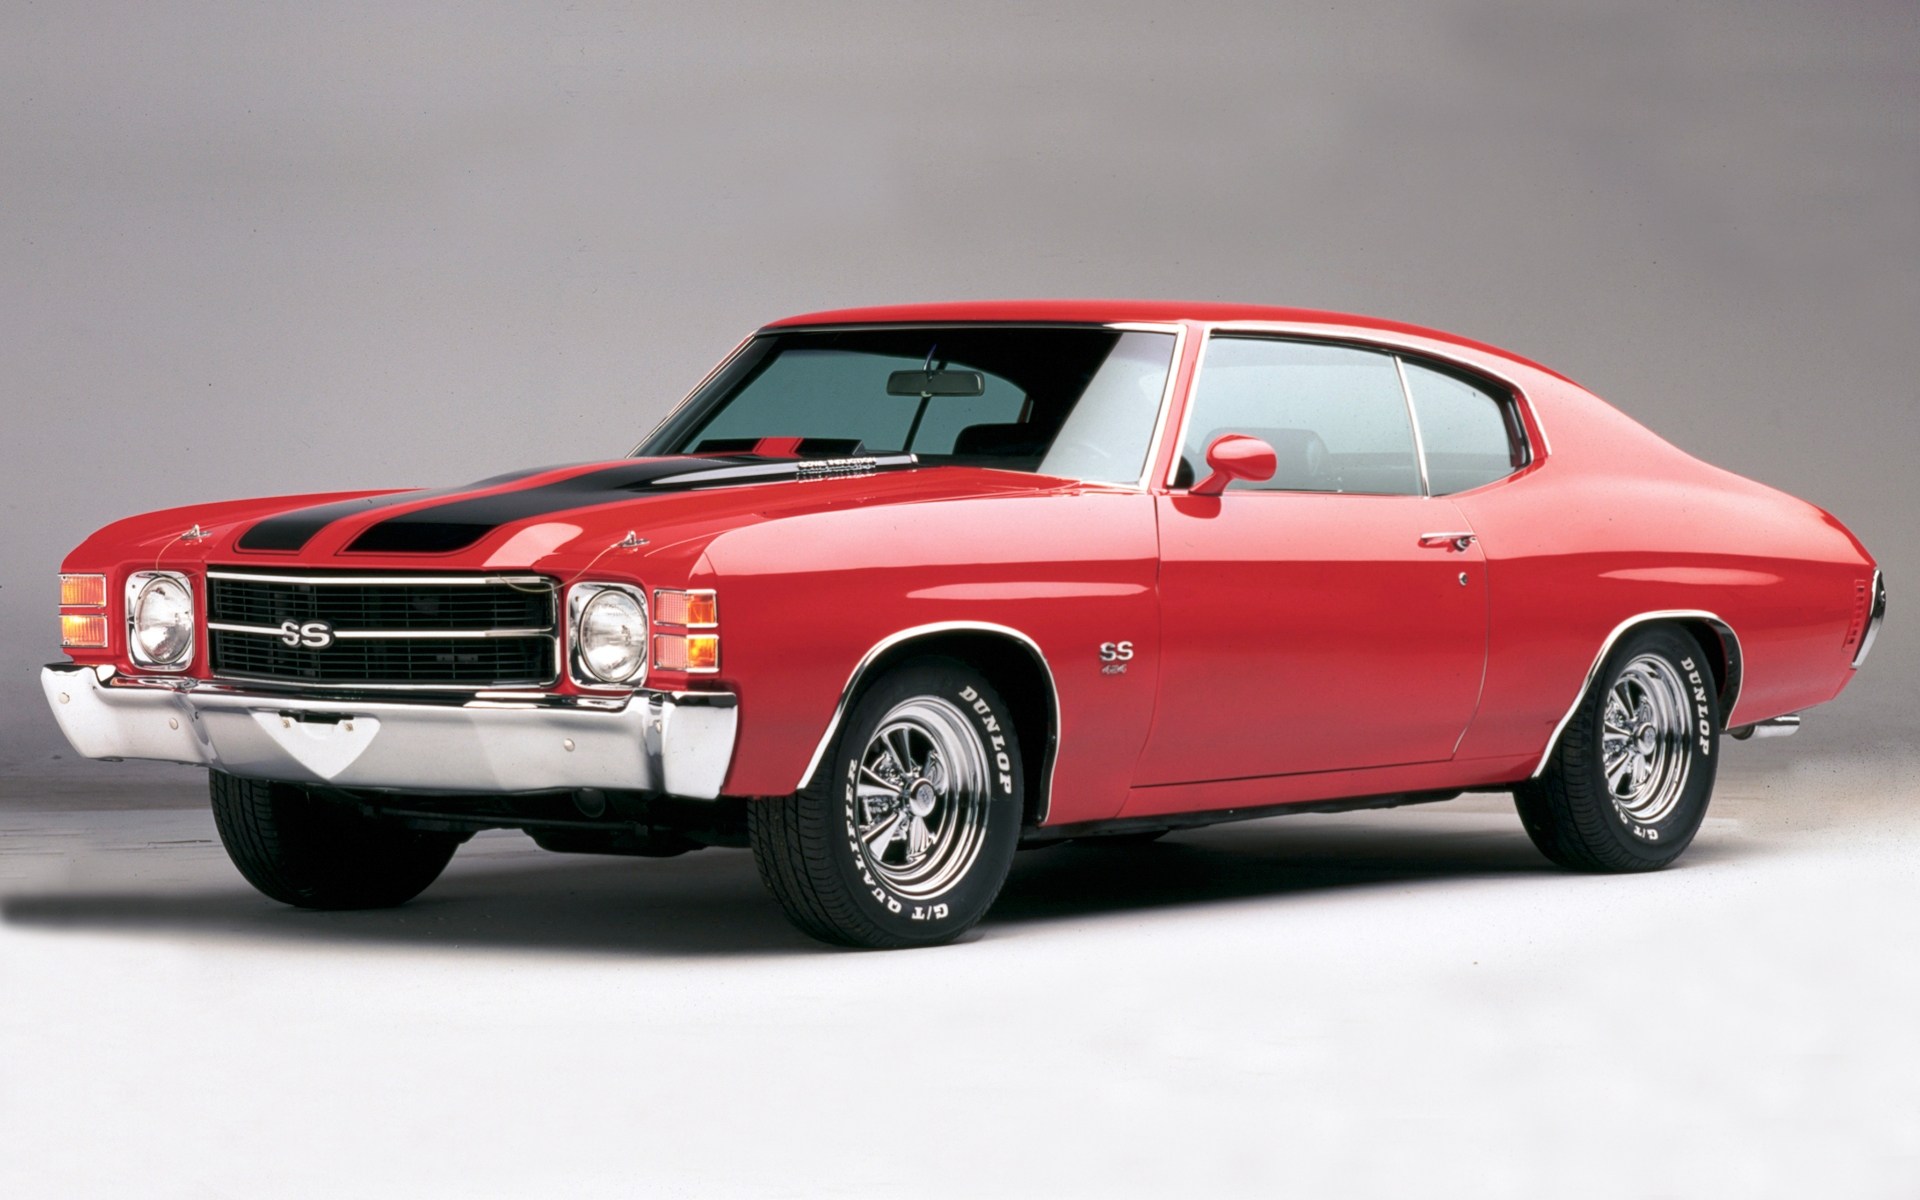 Wallpaper Muscle Cars   1971 Chevrolet Chevelle SS Chevelle Muscle 1920x1200